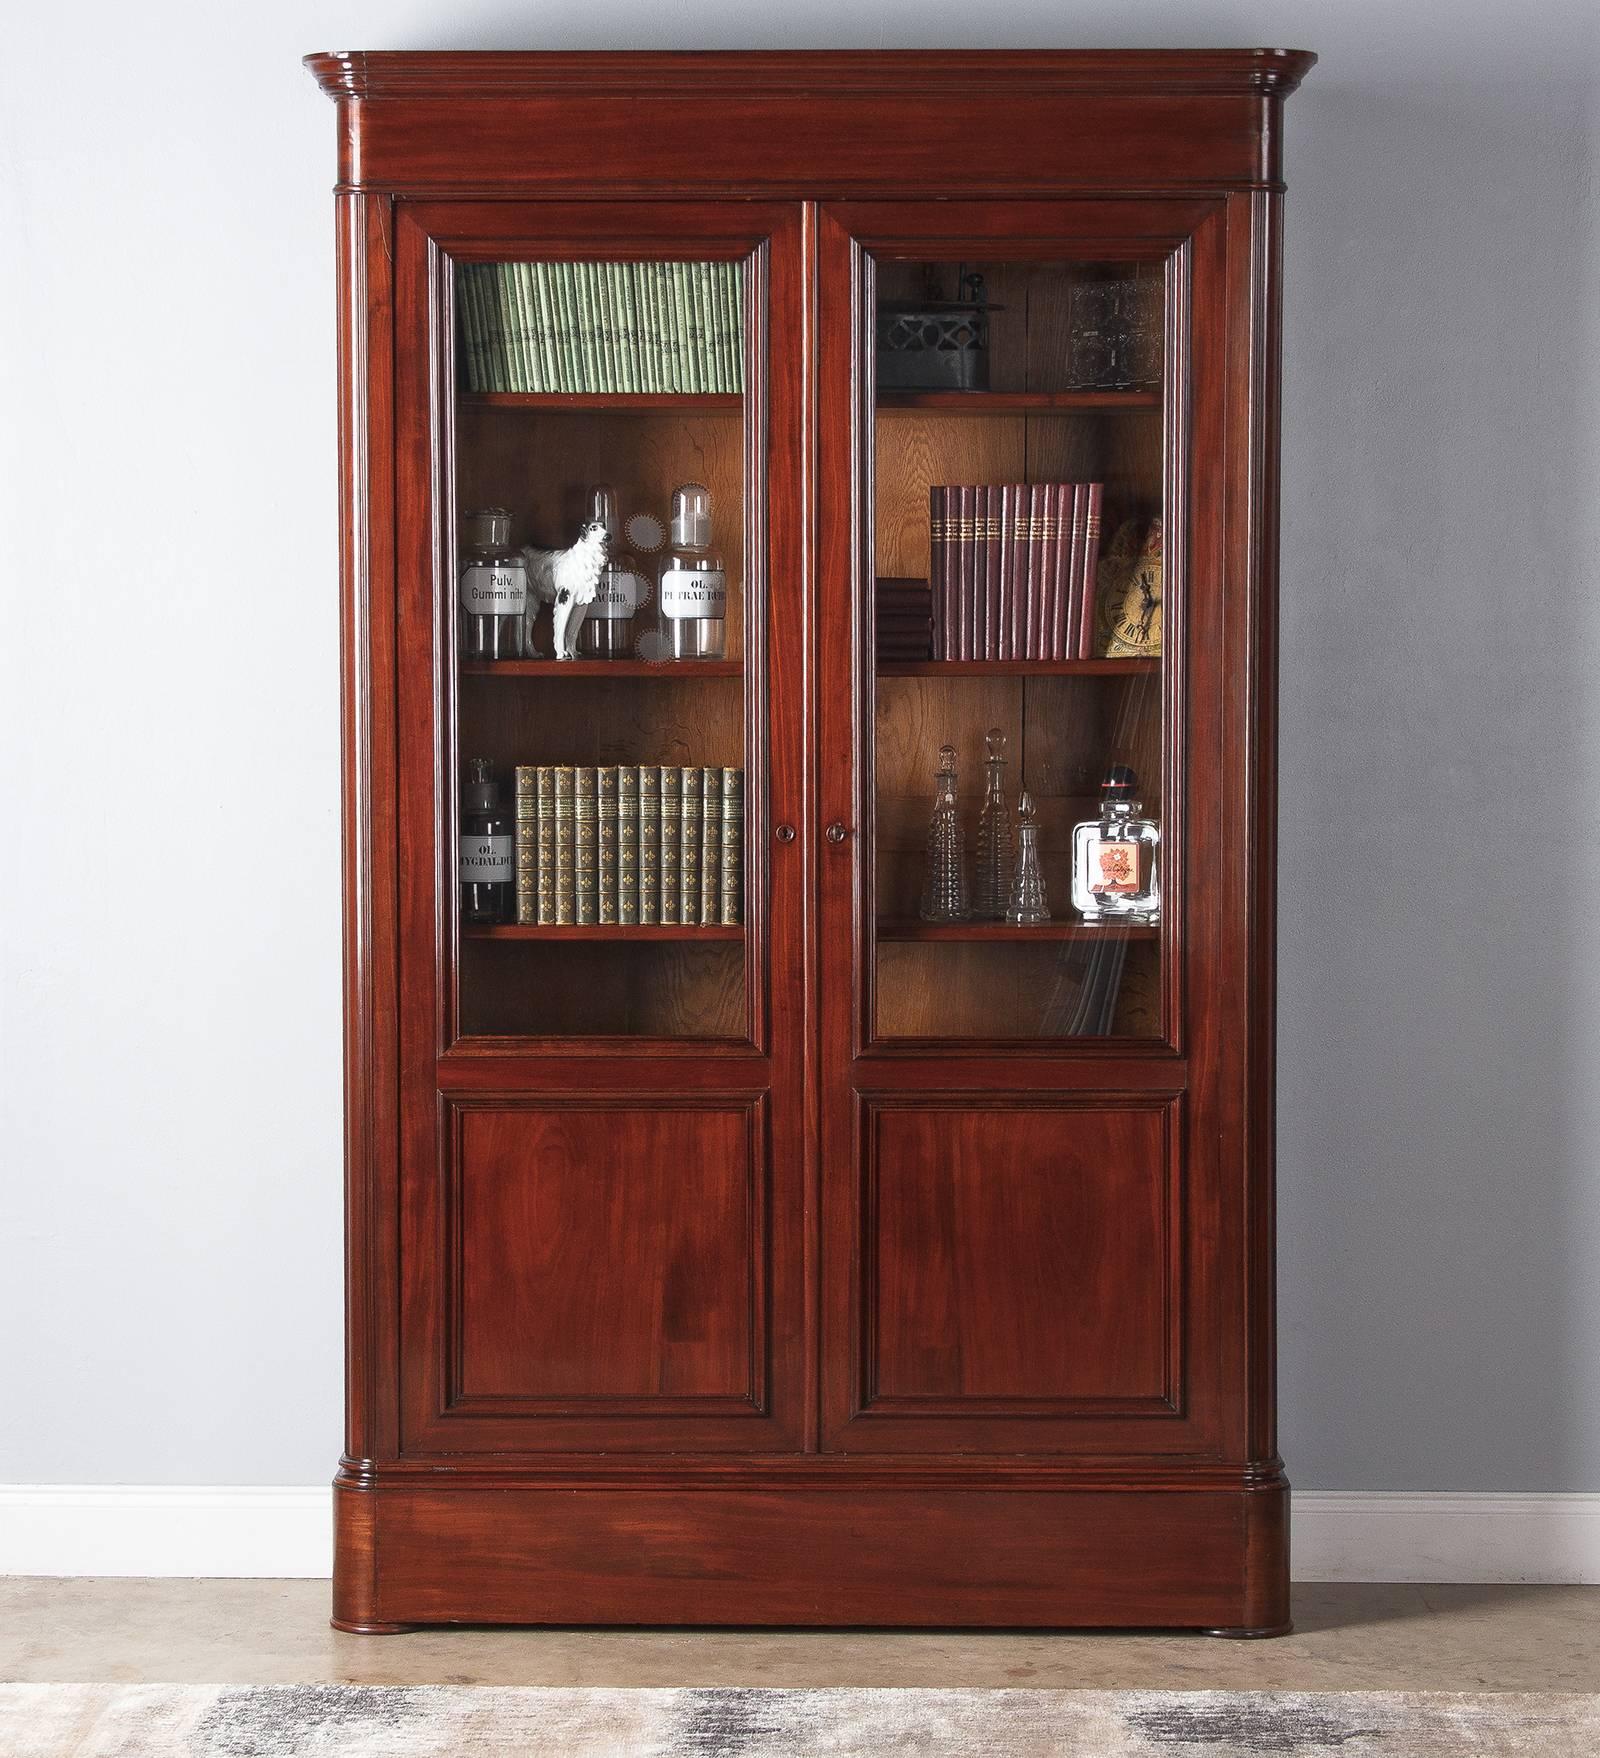 A large, debonair mahogany bookcase from the Restoration period, circa 1820. The Cuban mahogany is a glossy, rich and warm-toned brown. Two front doors with original glass and panelled lower portion have molded trim throughout. Handsome round wooden